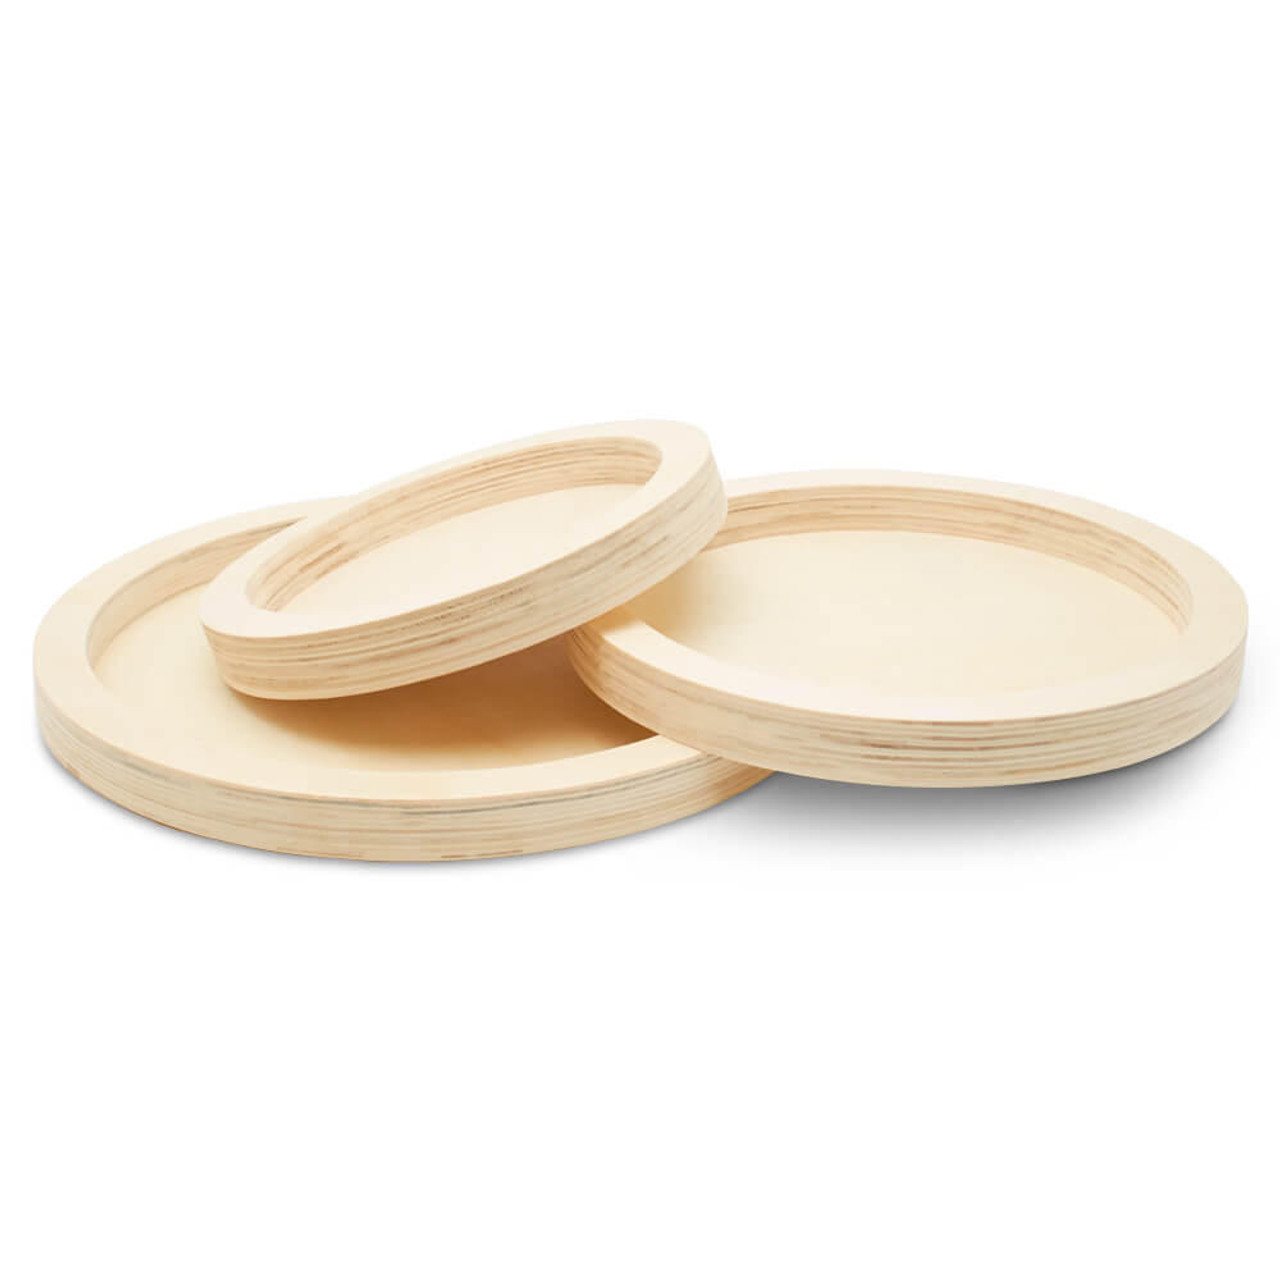 Woodpeckers Crafts, DIY Unfinished Wood Shapes Cutouts Tray, Pack of 3